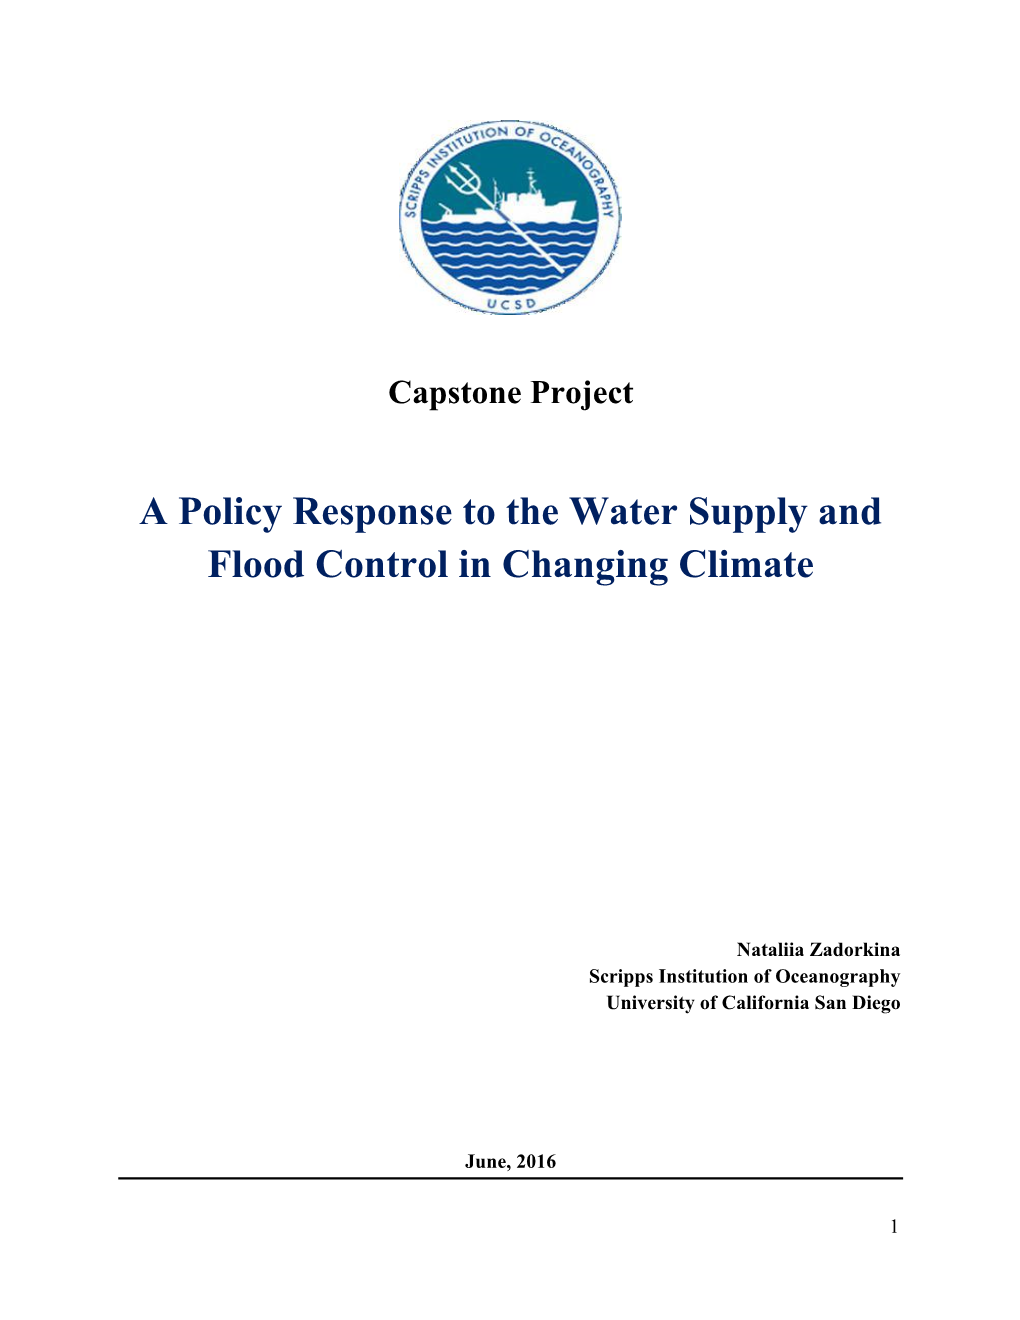 A Policy Response to the Water Supply and Flood Control in Changing Climate